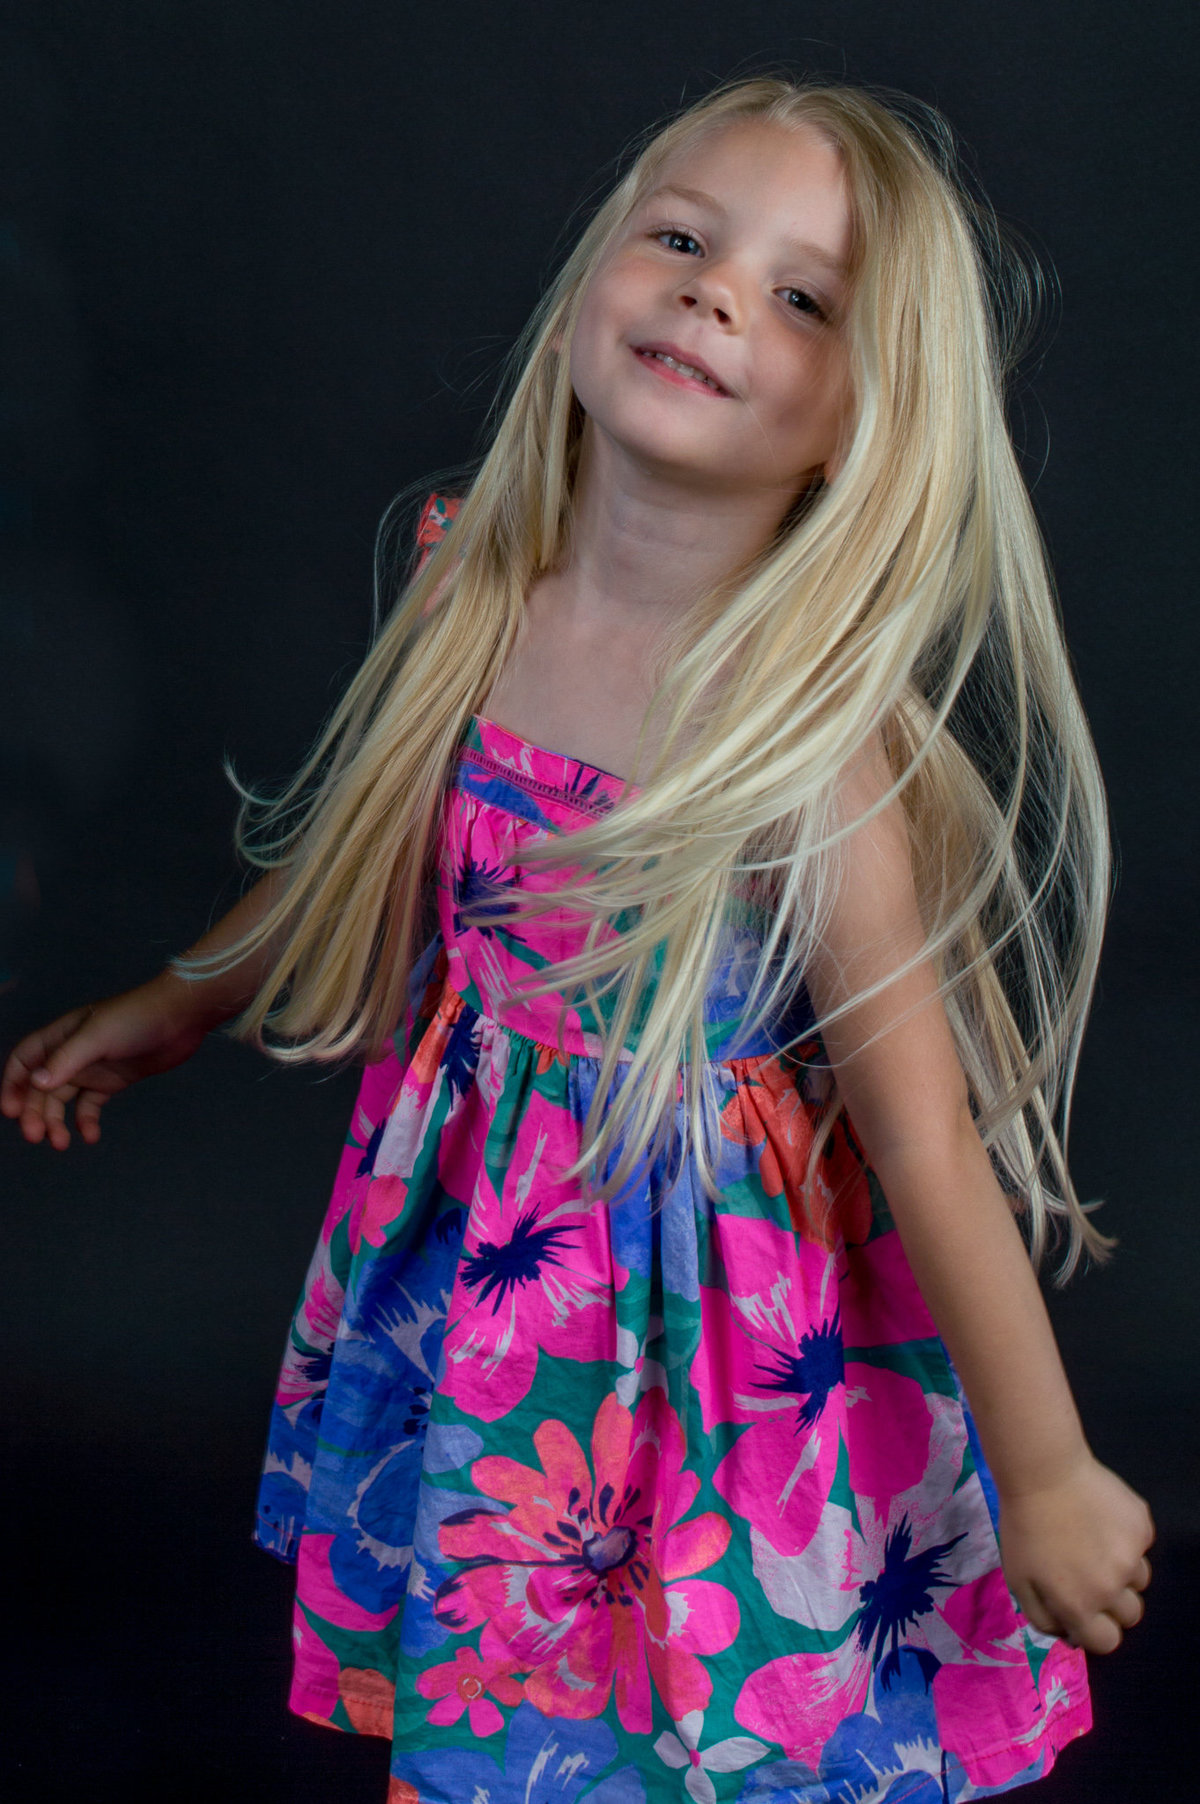 A girl twirls during her studio photo session